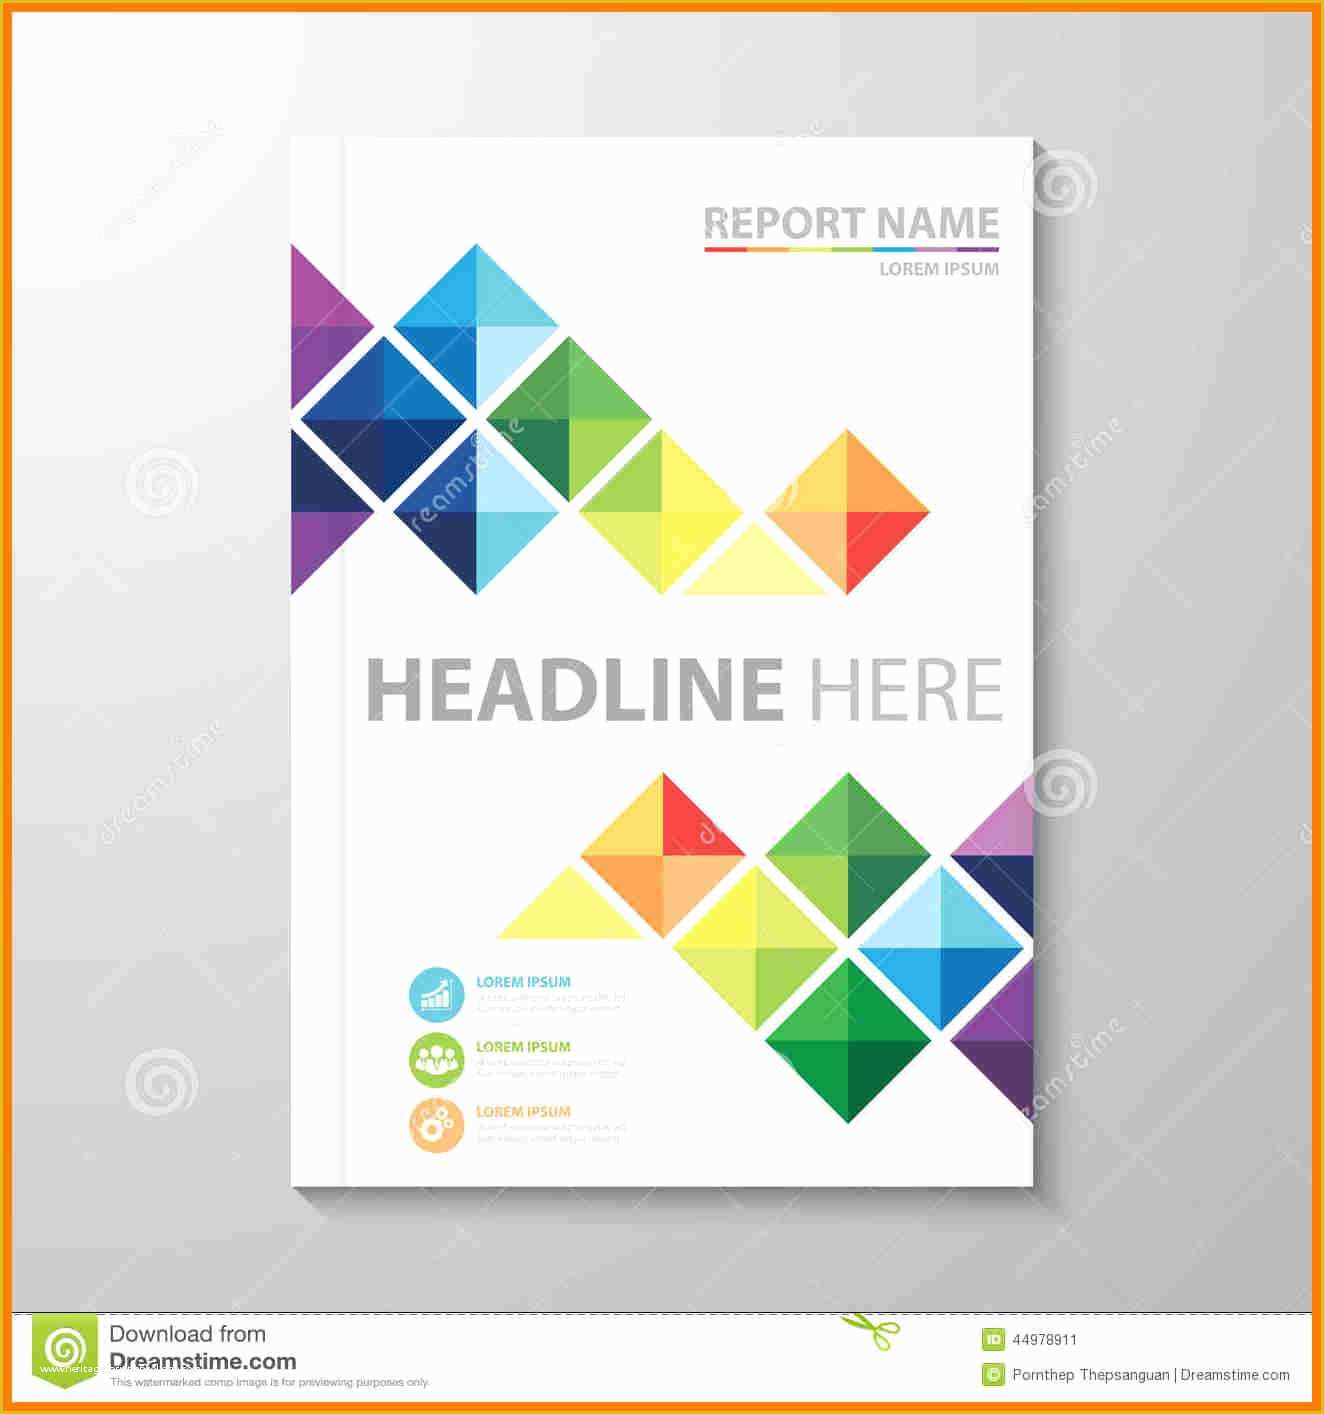 Free Magazine Layout Templates for Word Of Title Page Template Word Beautiful Template Design Ideas